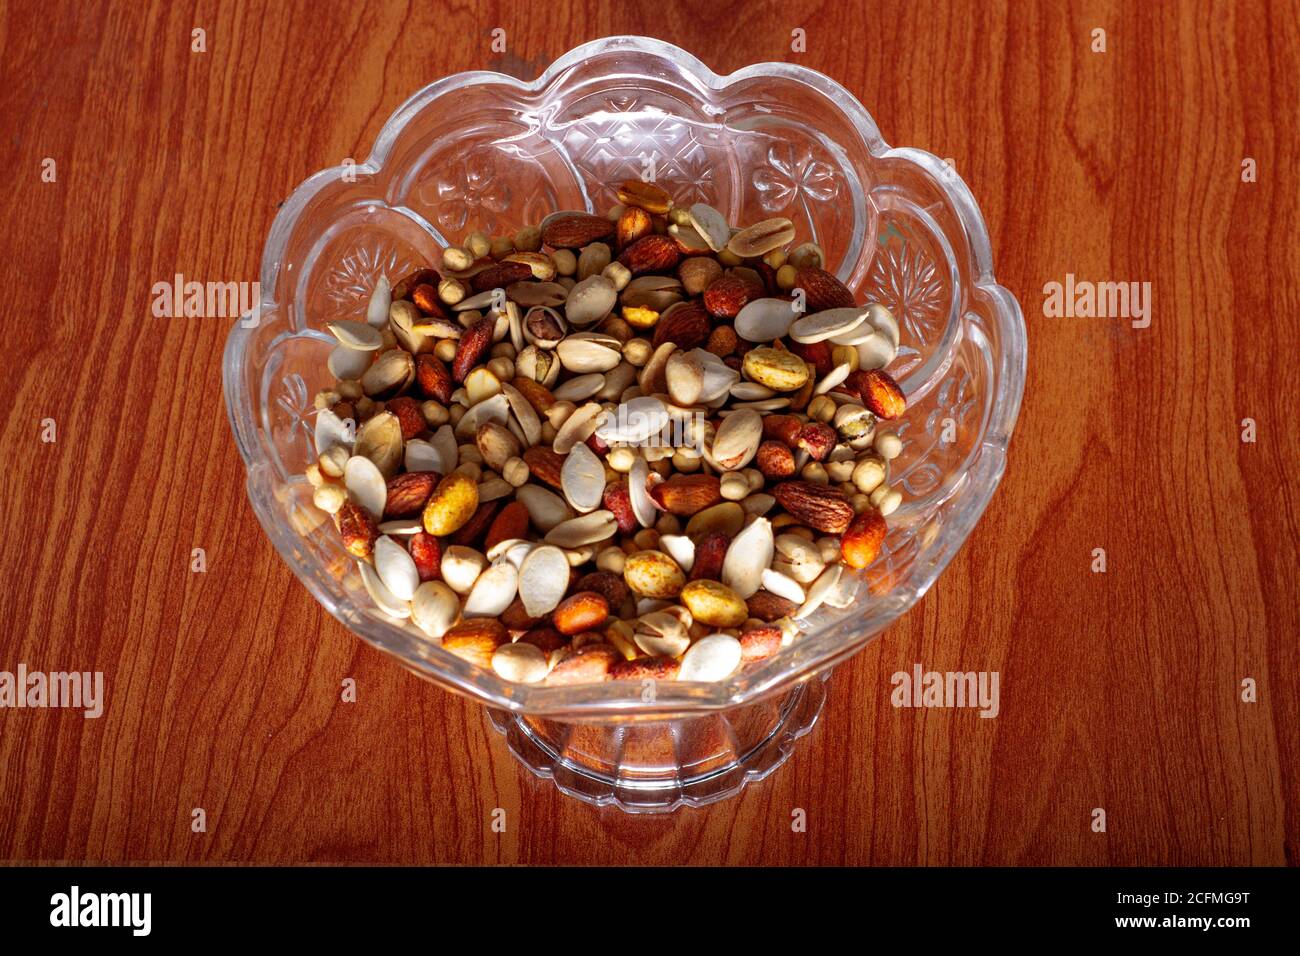 Dry fruits in a glass plate Stock Photo